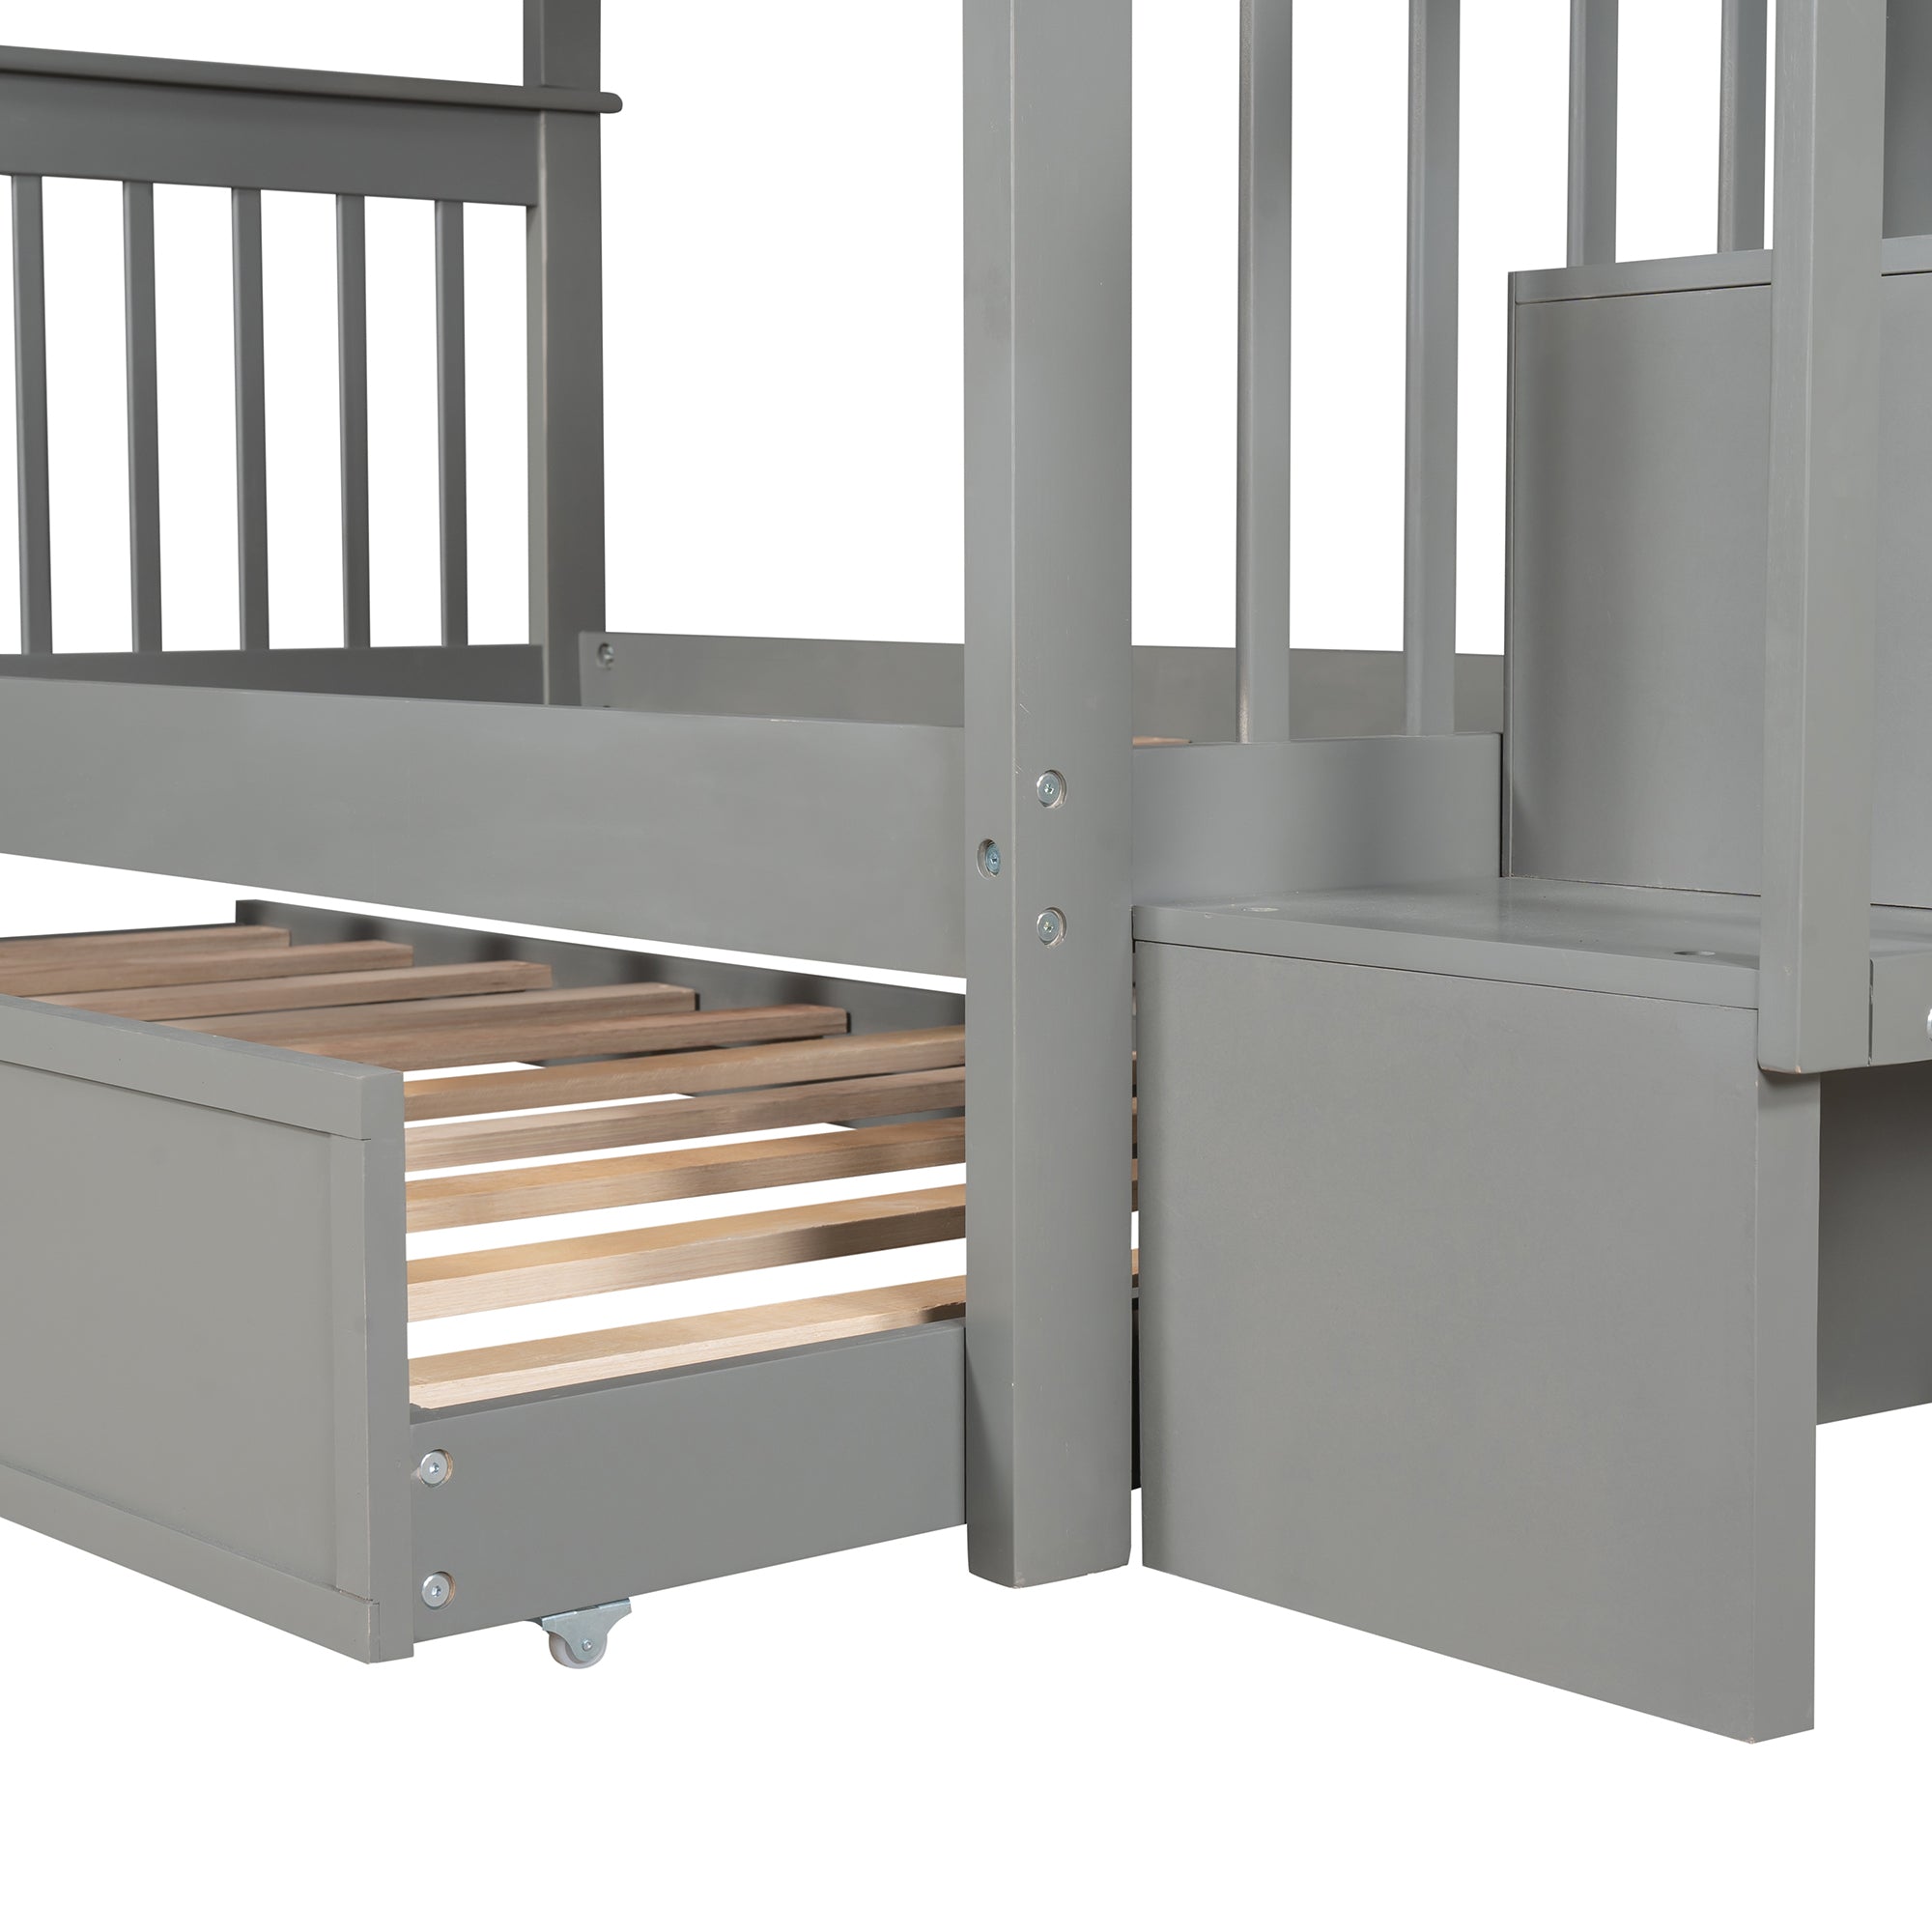 Stairway Twin-Over-Twin Bunk Bed with Twin size Trundle (Gray)